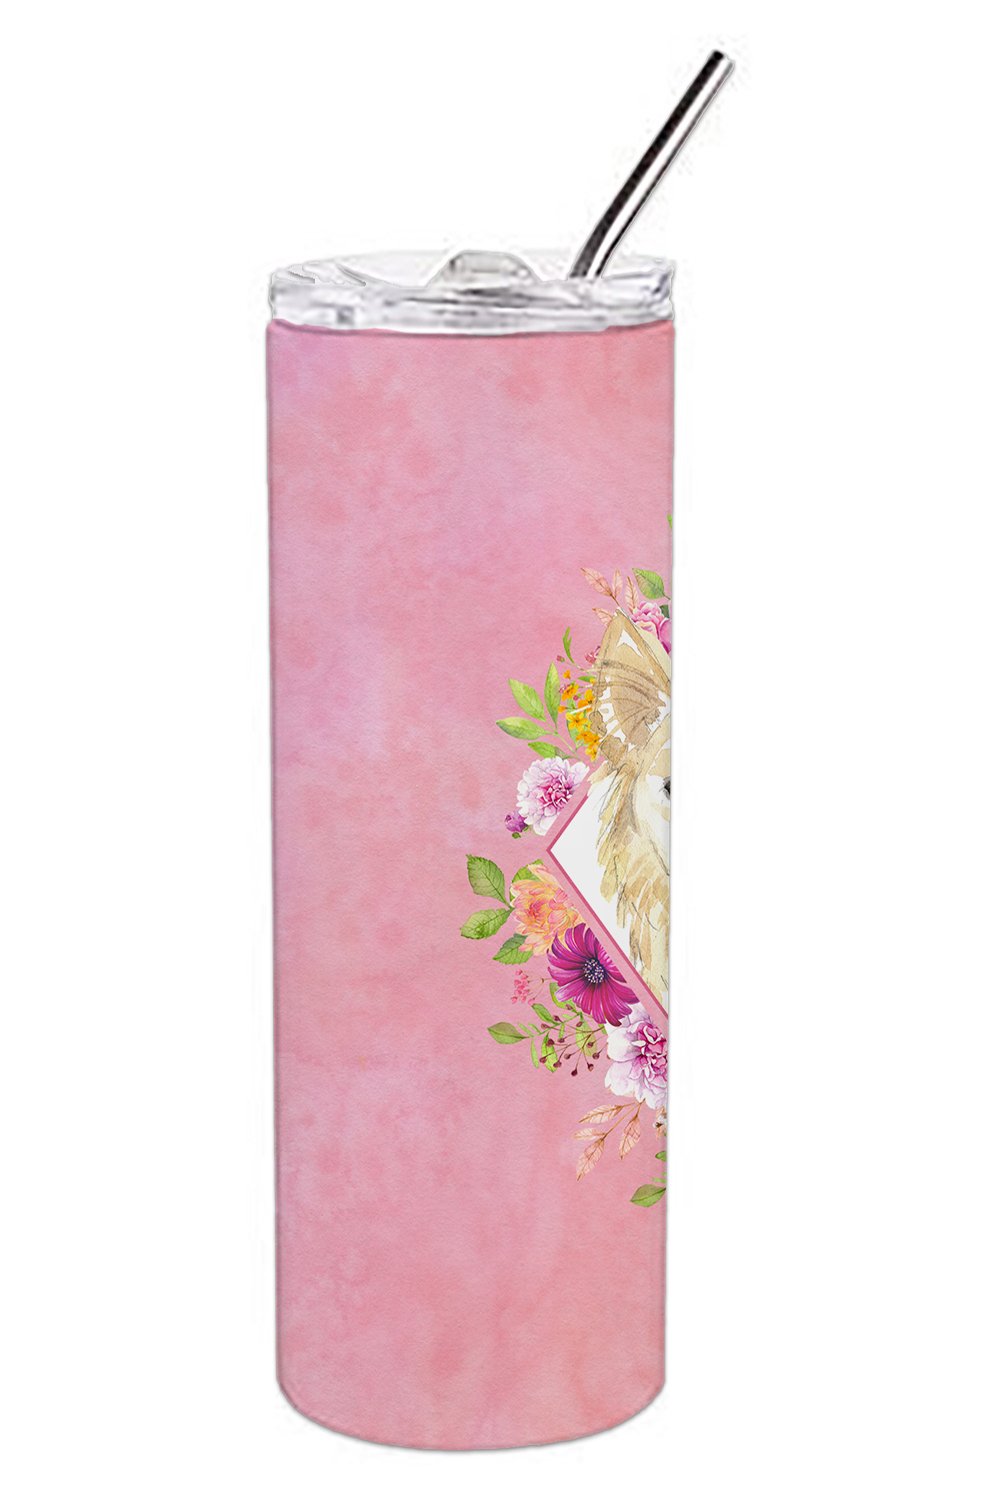 White Collie Pink Flowers Double Walled Stainless Steel 20 oz Skinny Tumbler CK4201TBL20 by Caroline's Treasures